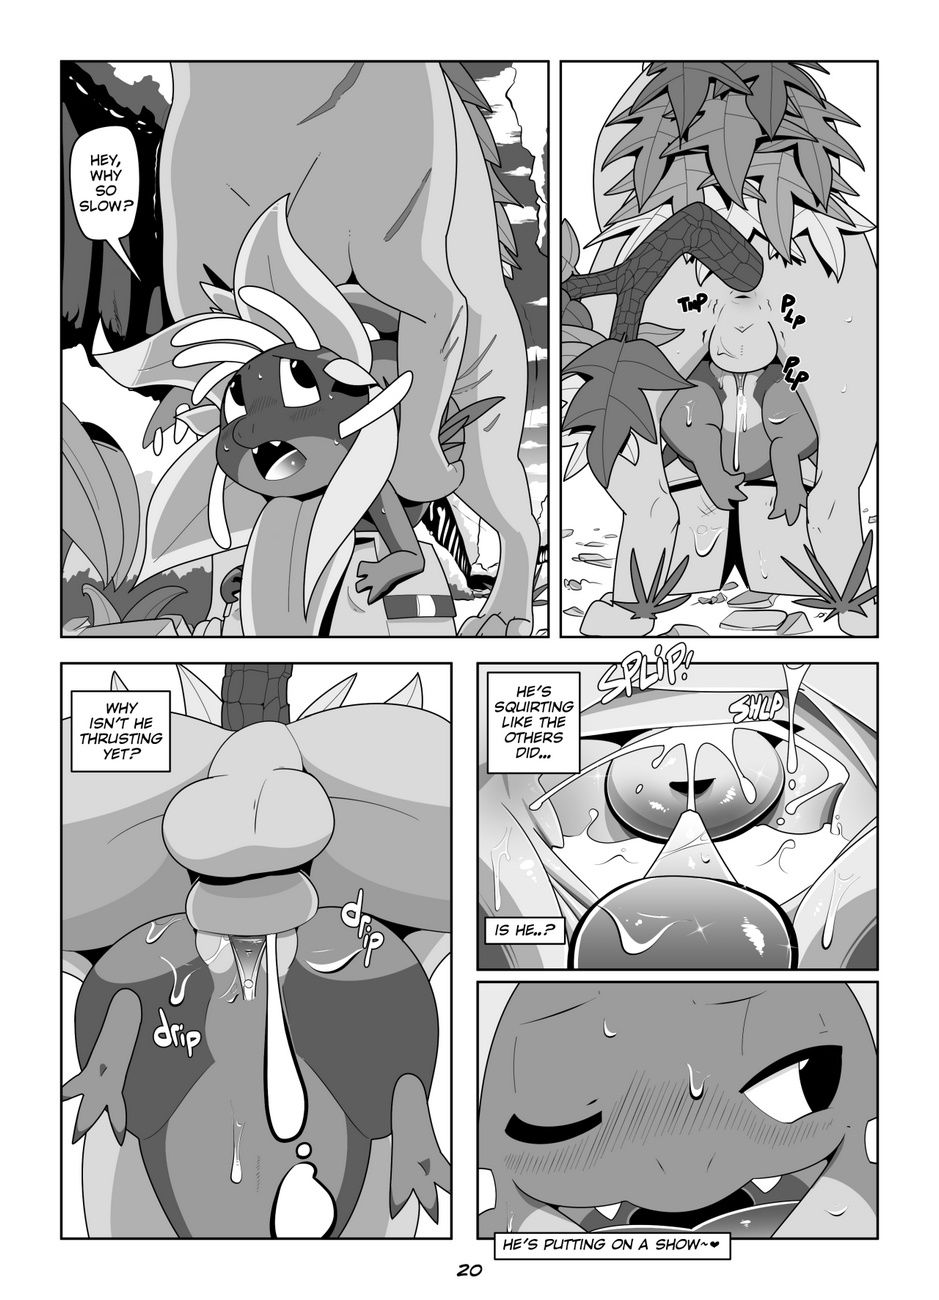 Knotted Wood - part 2 page 1